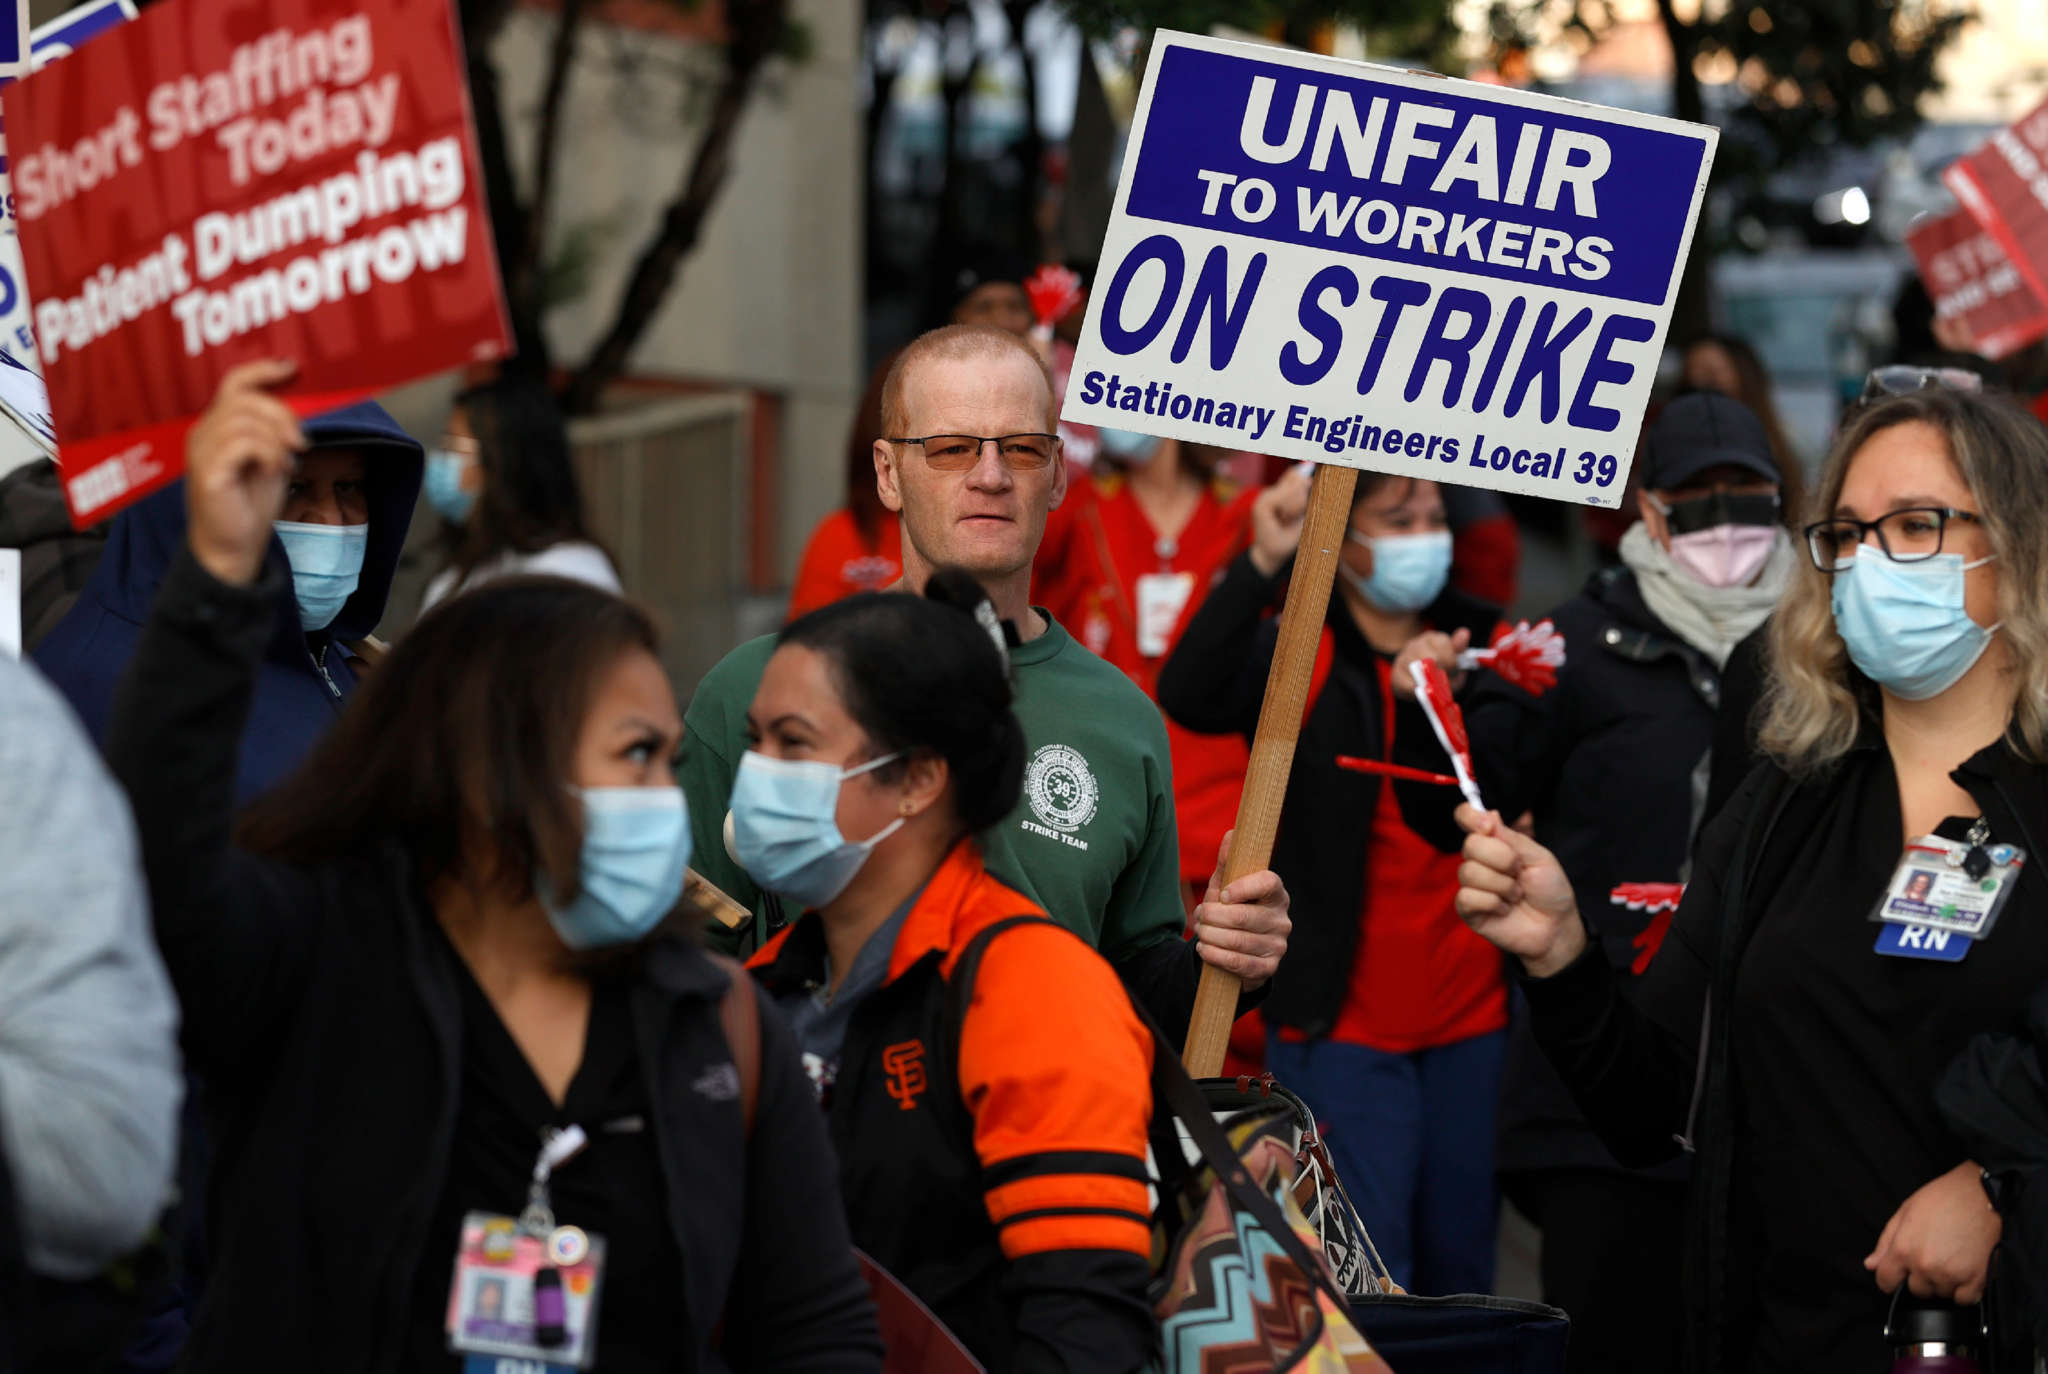 “Year of the Worker” 2021 Saw Over 3 Million Strike Days With 140K